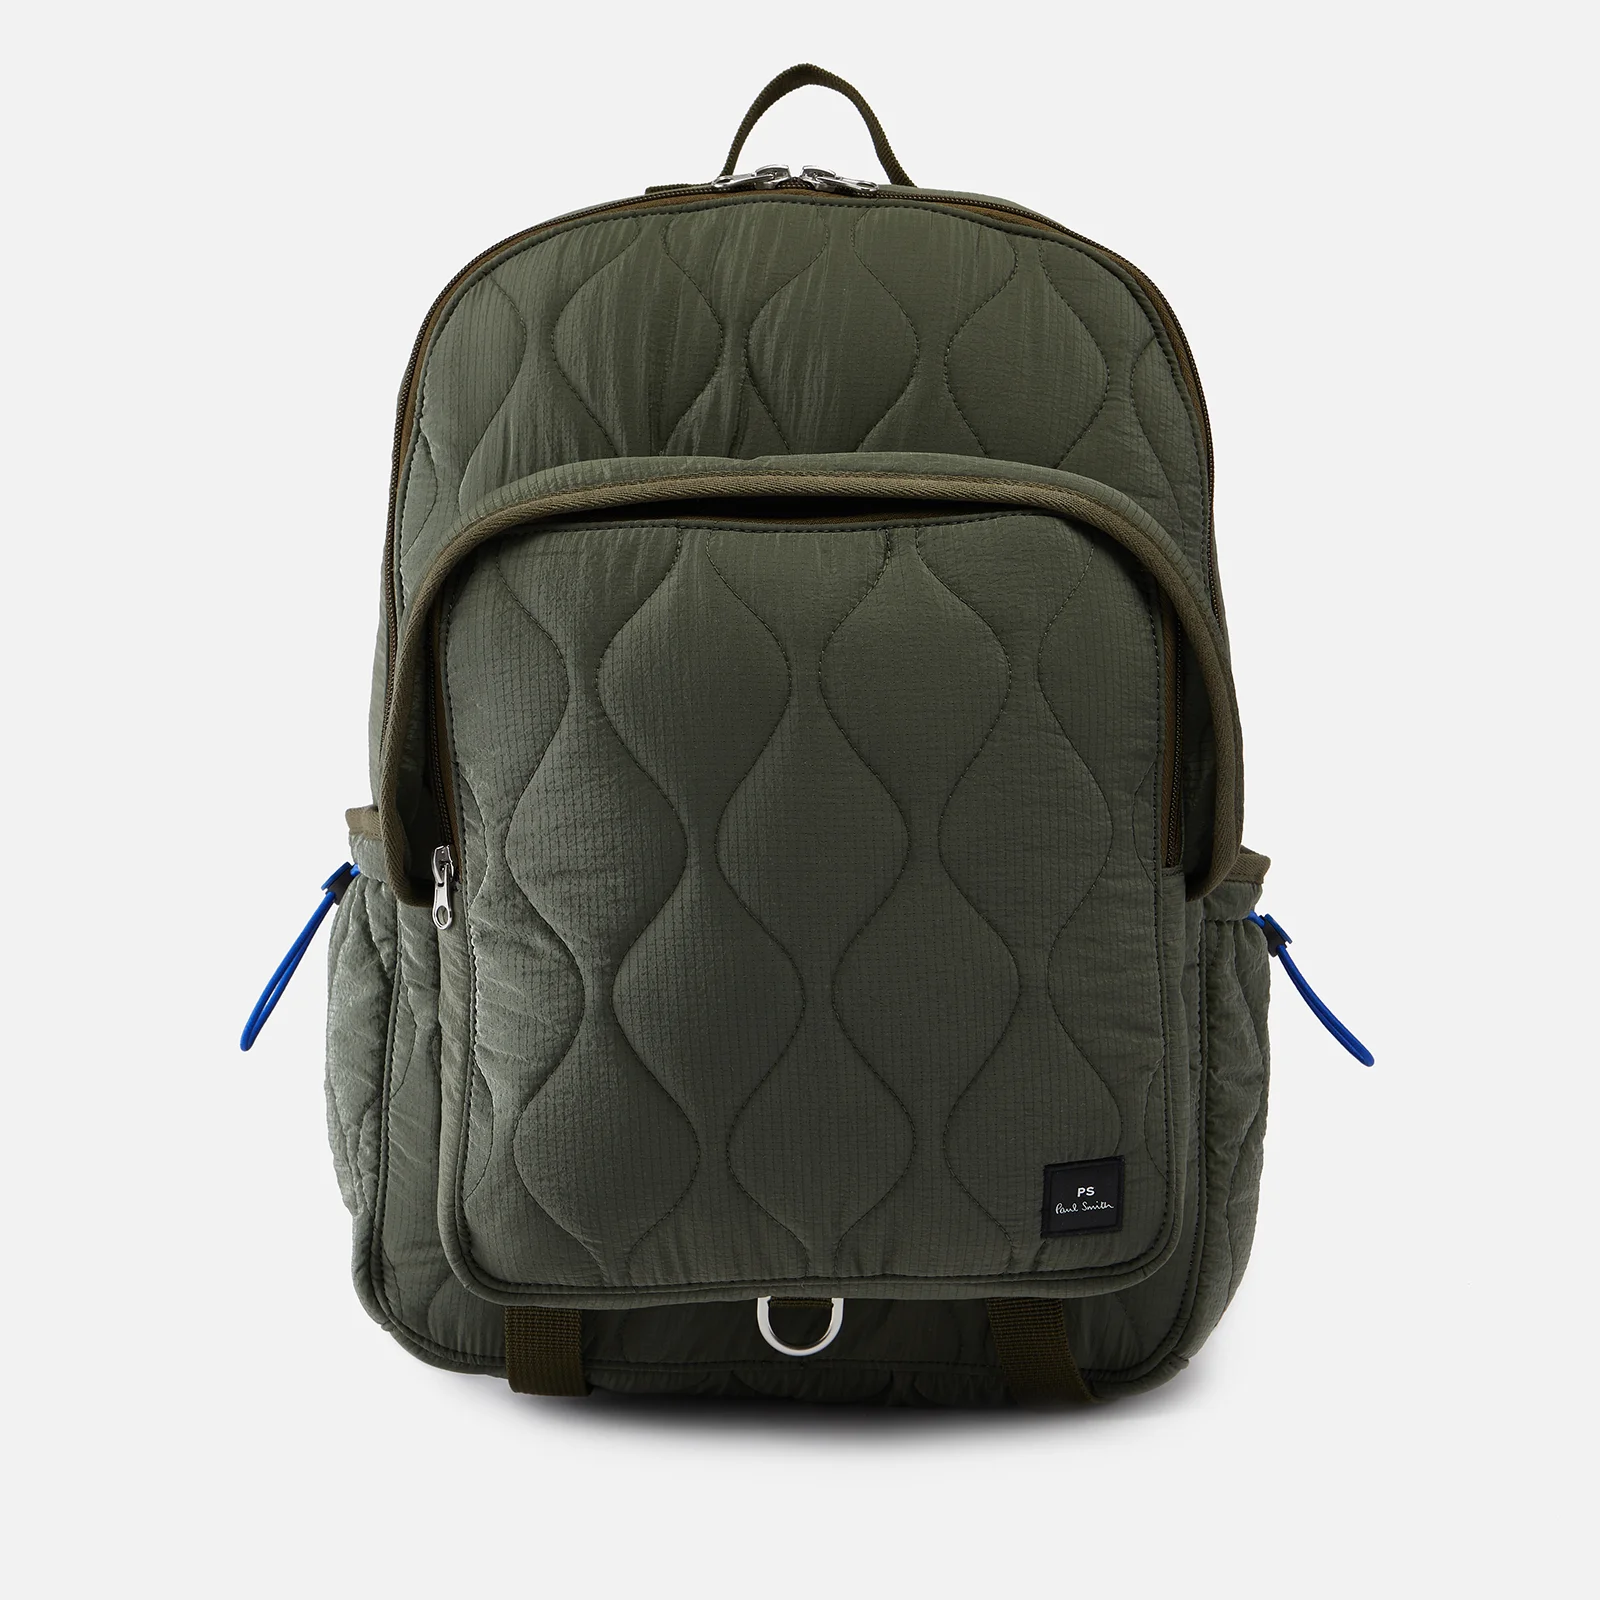 PS Paul Smith Reversible Backpack Image 1